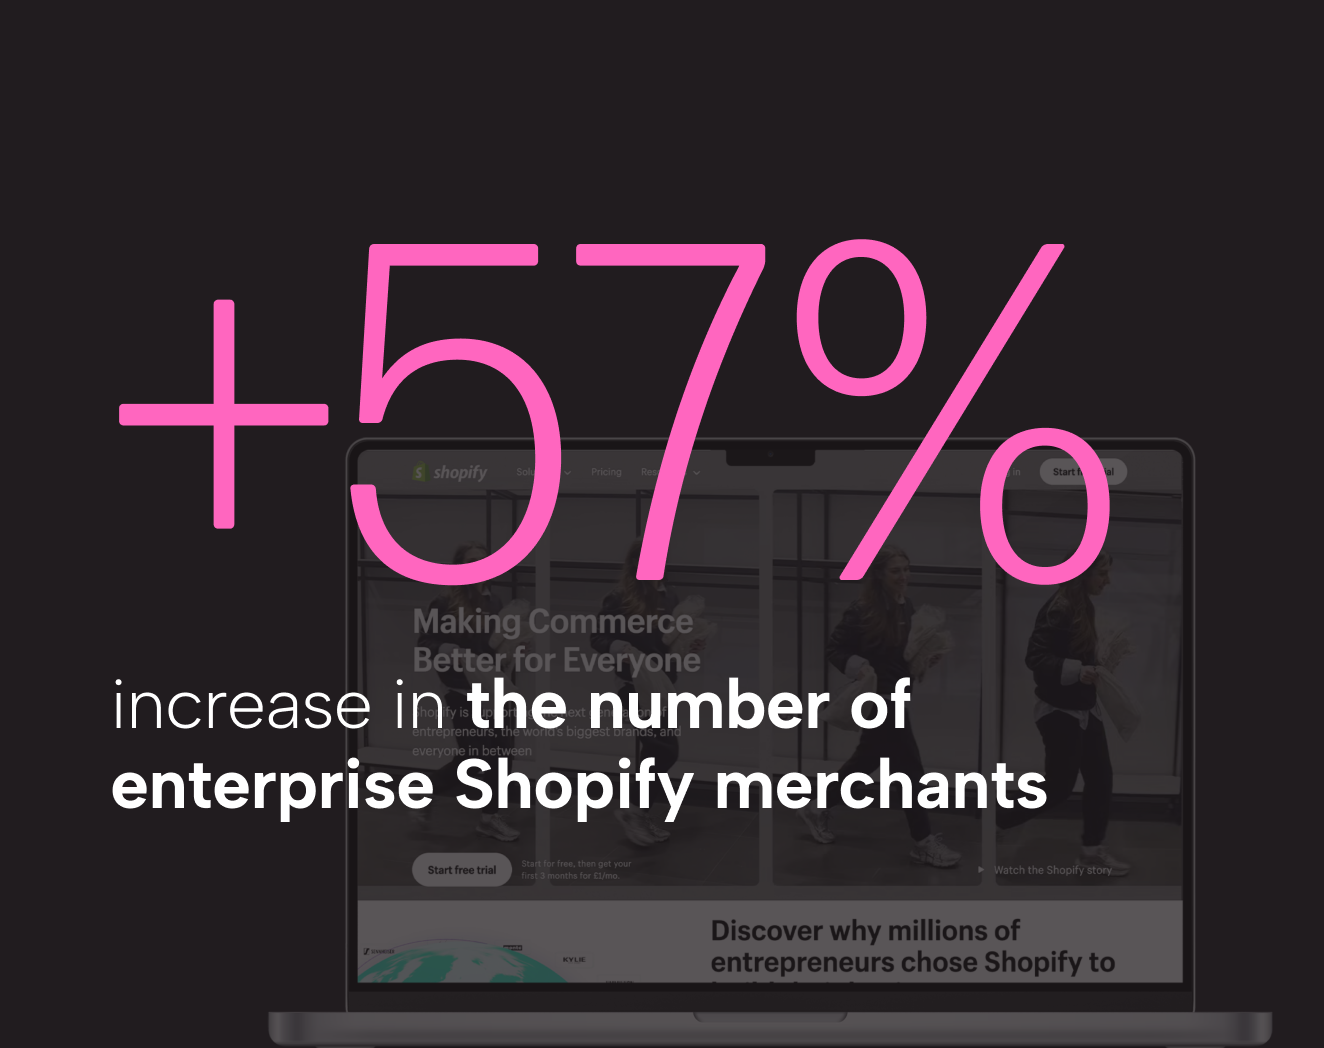 Nosto reports +57% increase in the number of enterprise Shopify merchants using its platform for search, merchandising, and personalization over the last 12 months